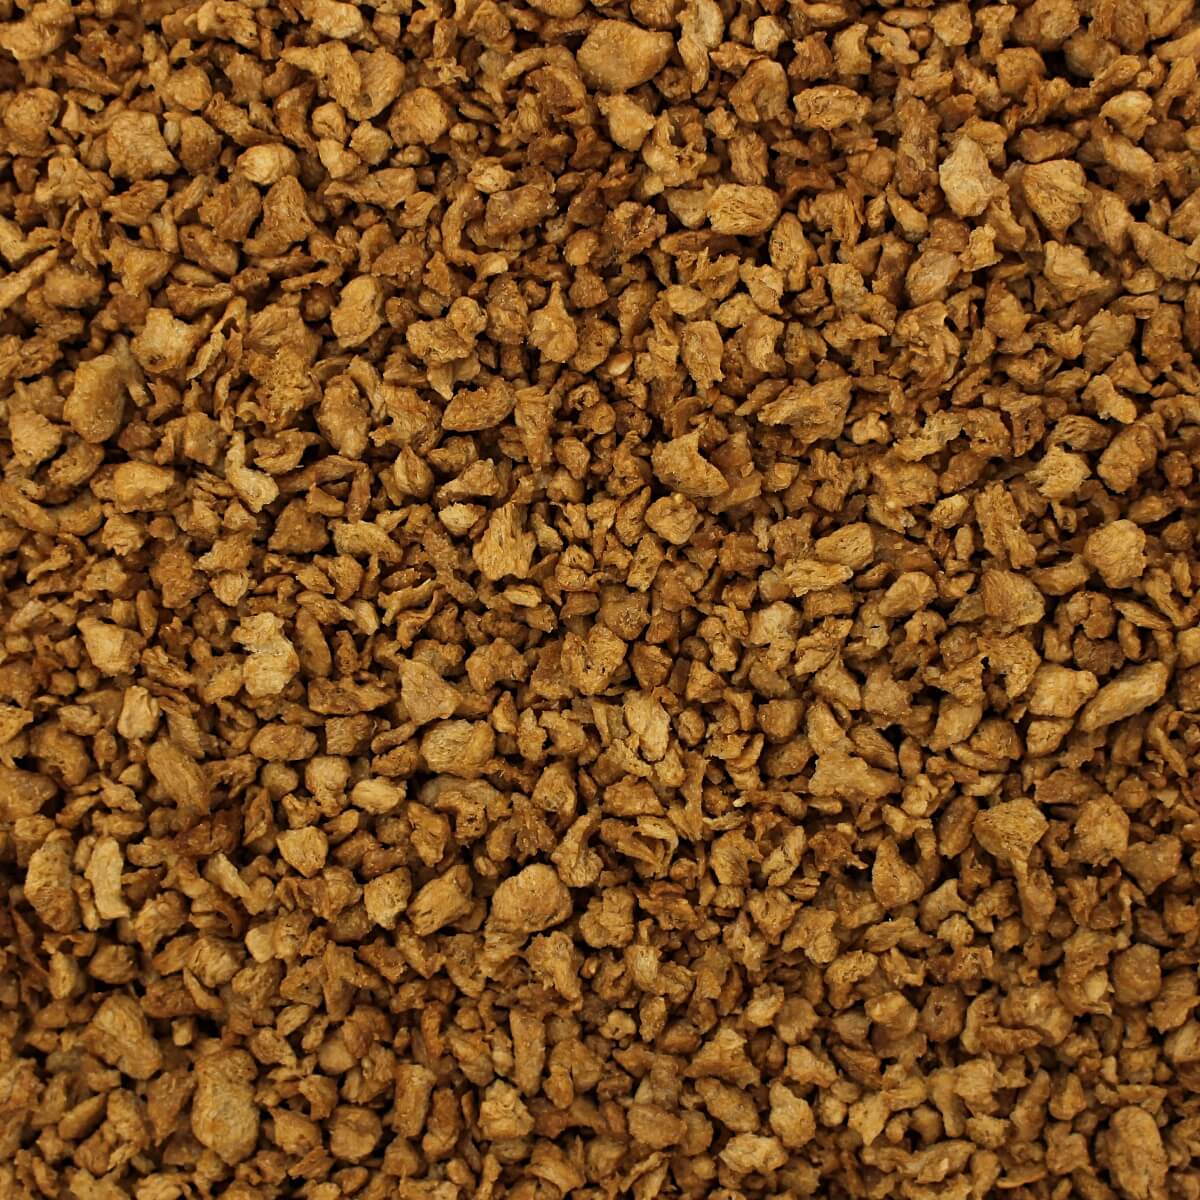 A close up image of a brown granola from the Harmony House Flavored Plant-Based Protein Sampler.